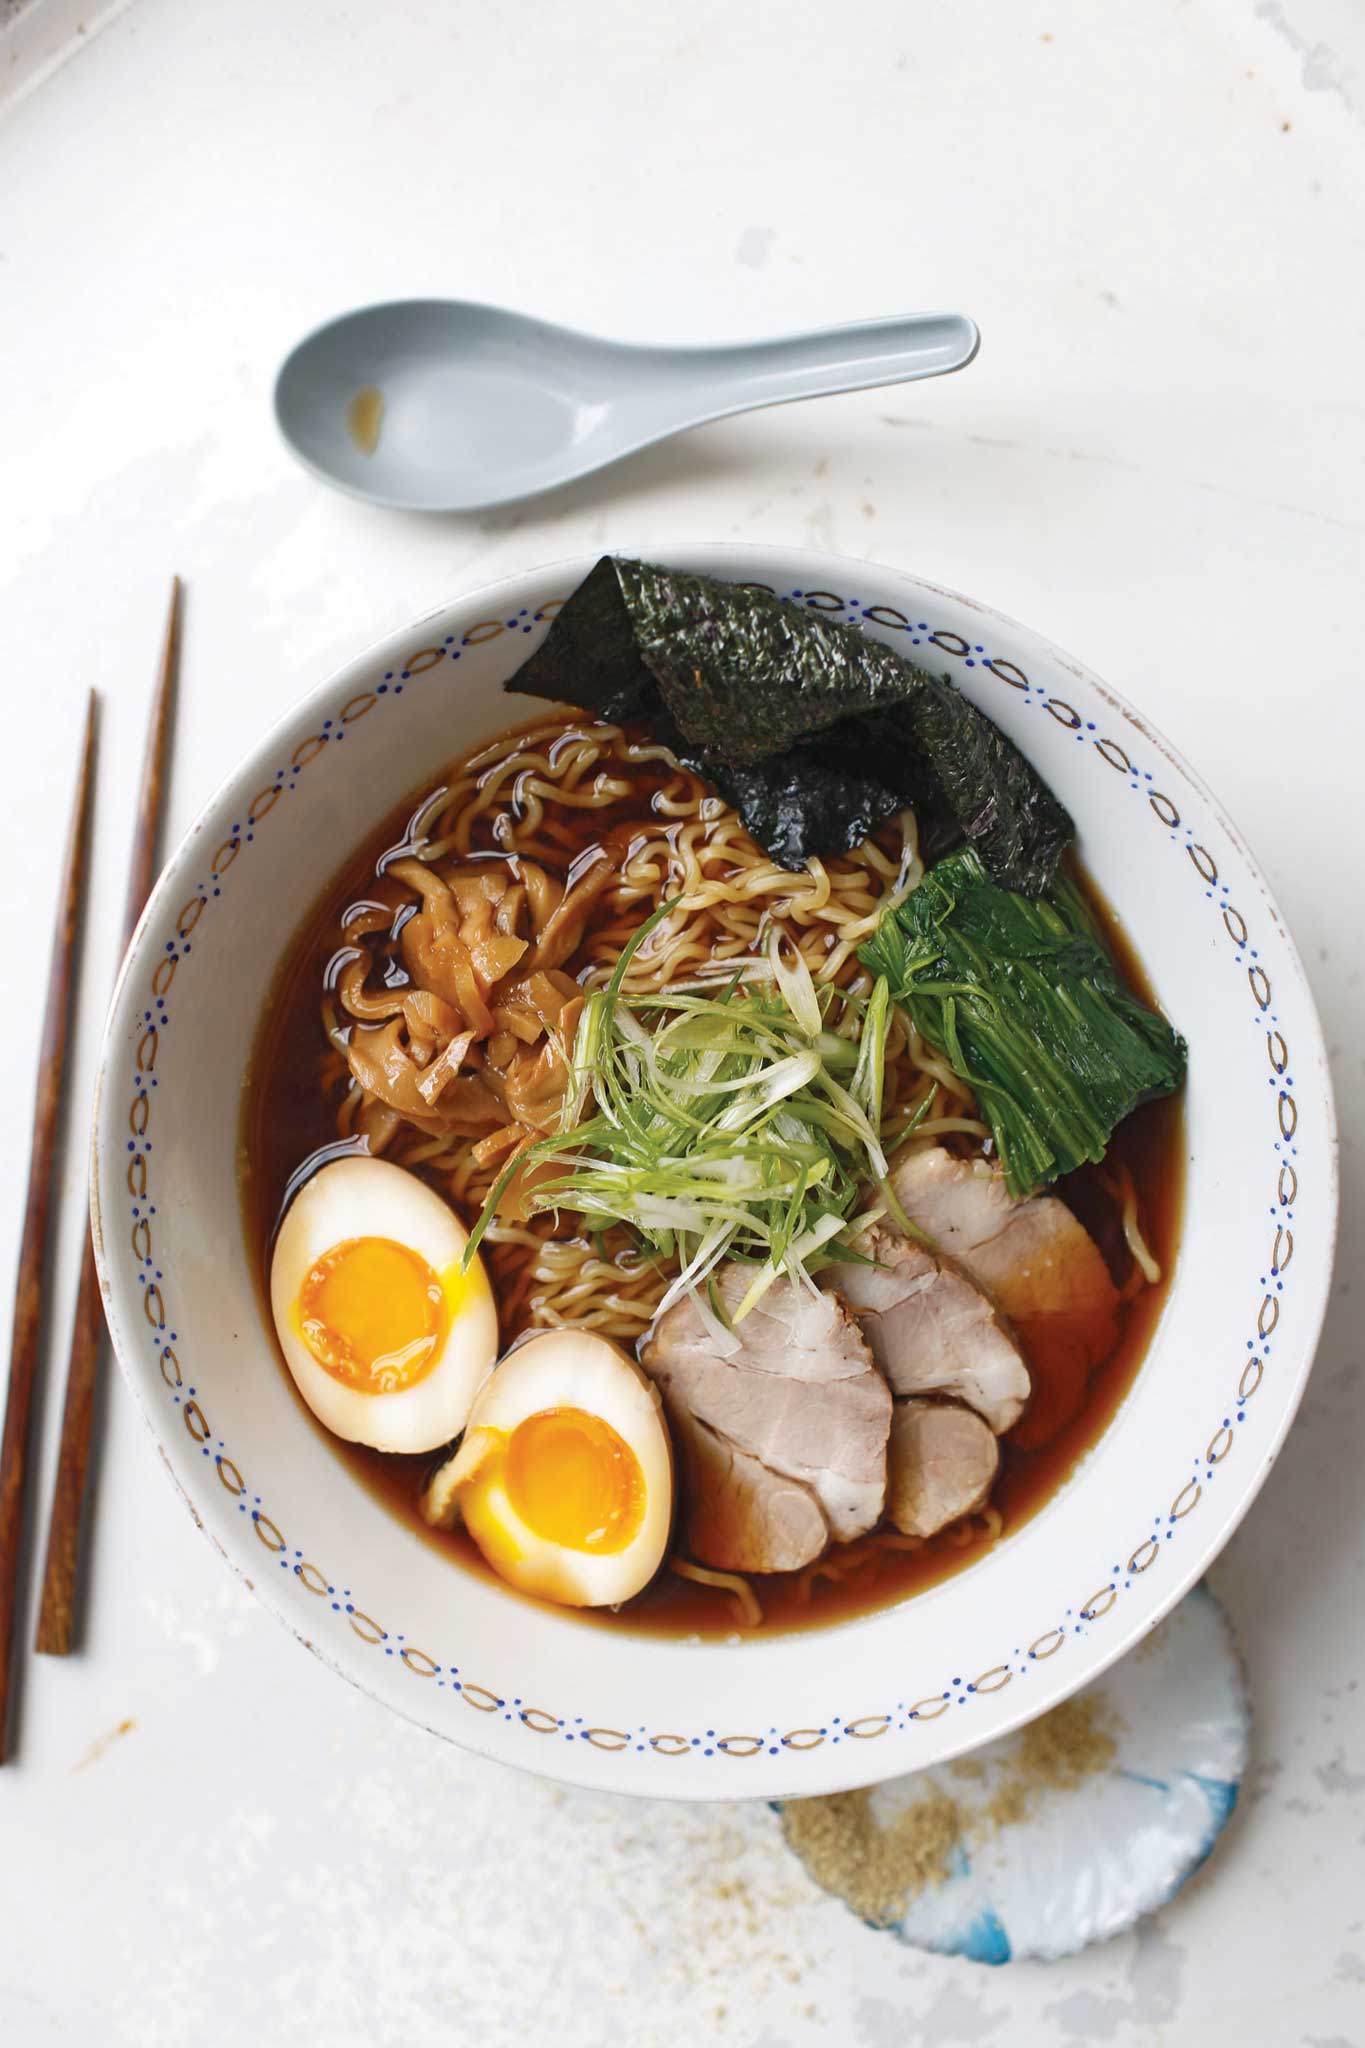 Complex layering of flavours: In Japan, ramen borders on an obsession